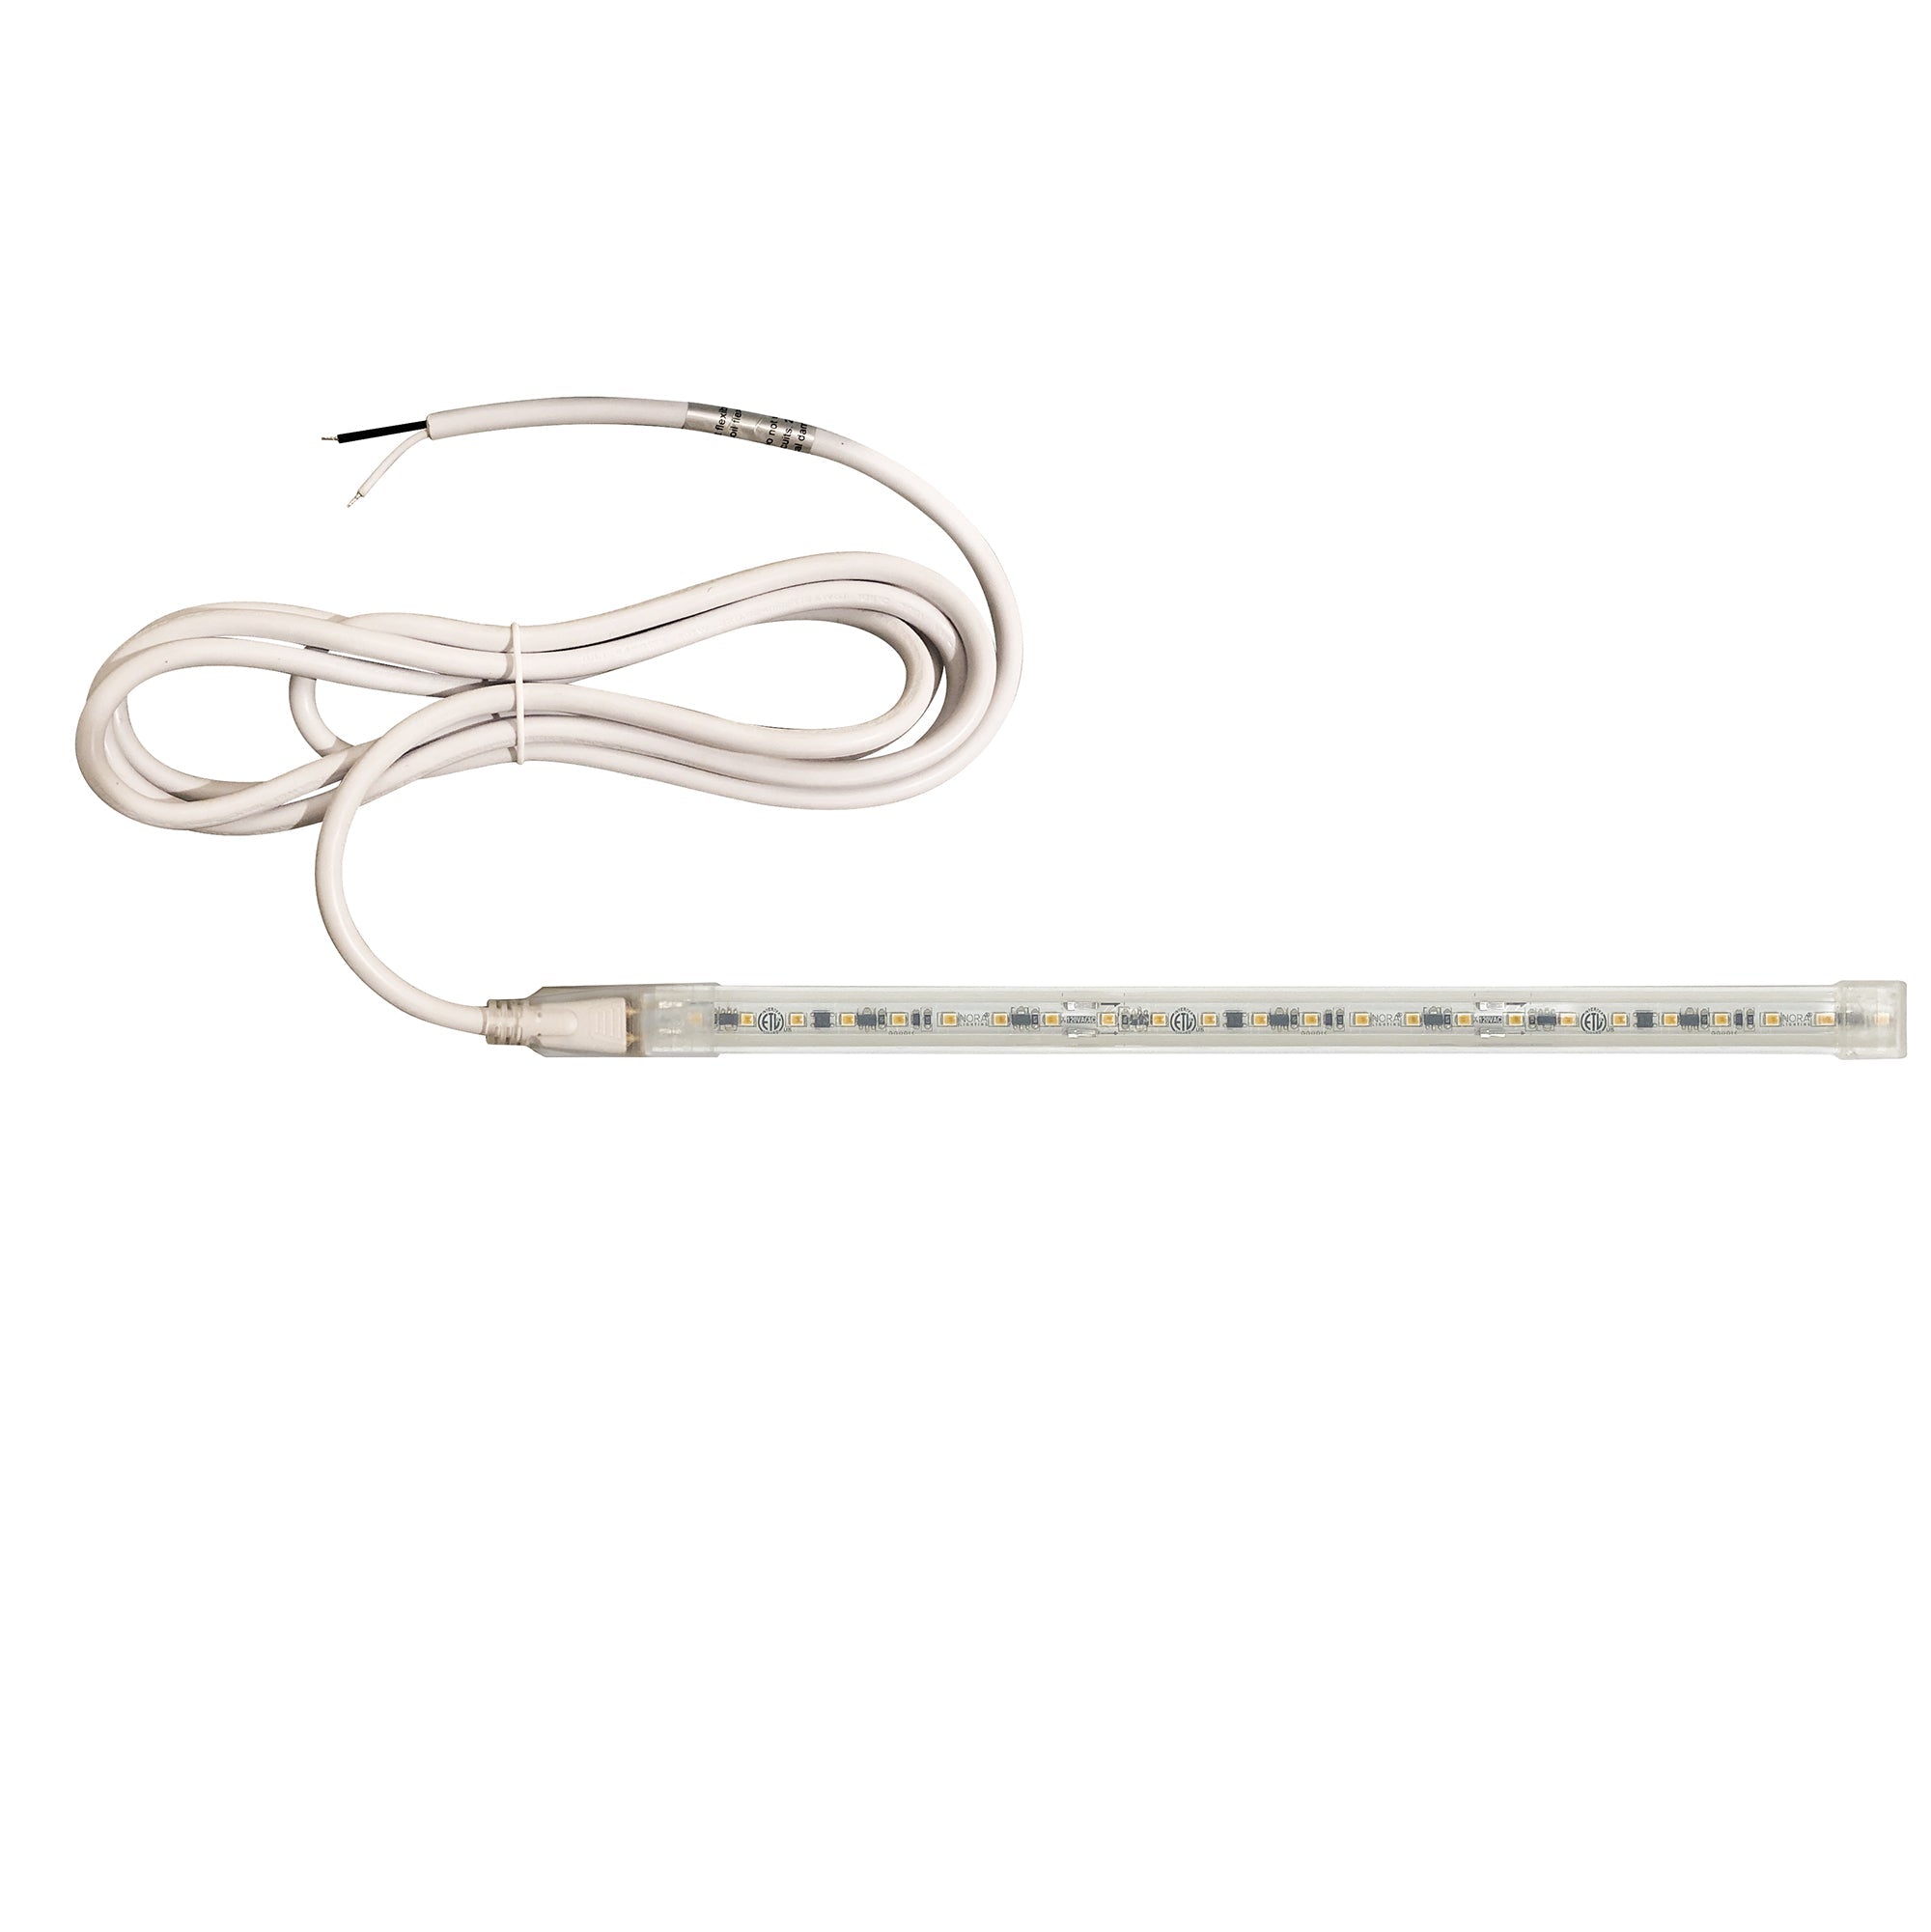 Nora Lighting NUTP13-W100-12-930/HW - Accent / Undercabinet - Custom Cut 100-ft 120V Continuous LED Tape Light, 330lm / 3.6W per foot, 3000K, w/ Mounting Clips and 8' Hardwired Power Cord